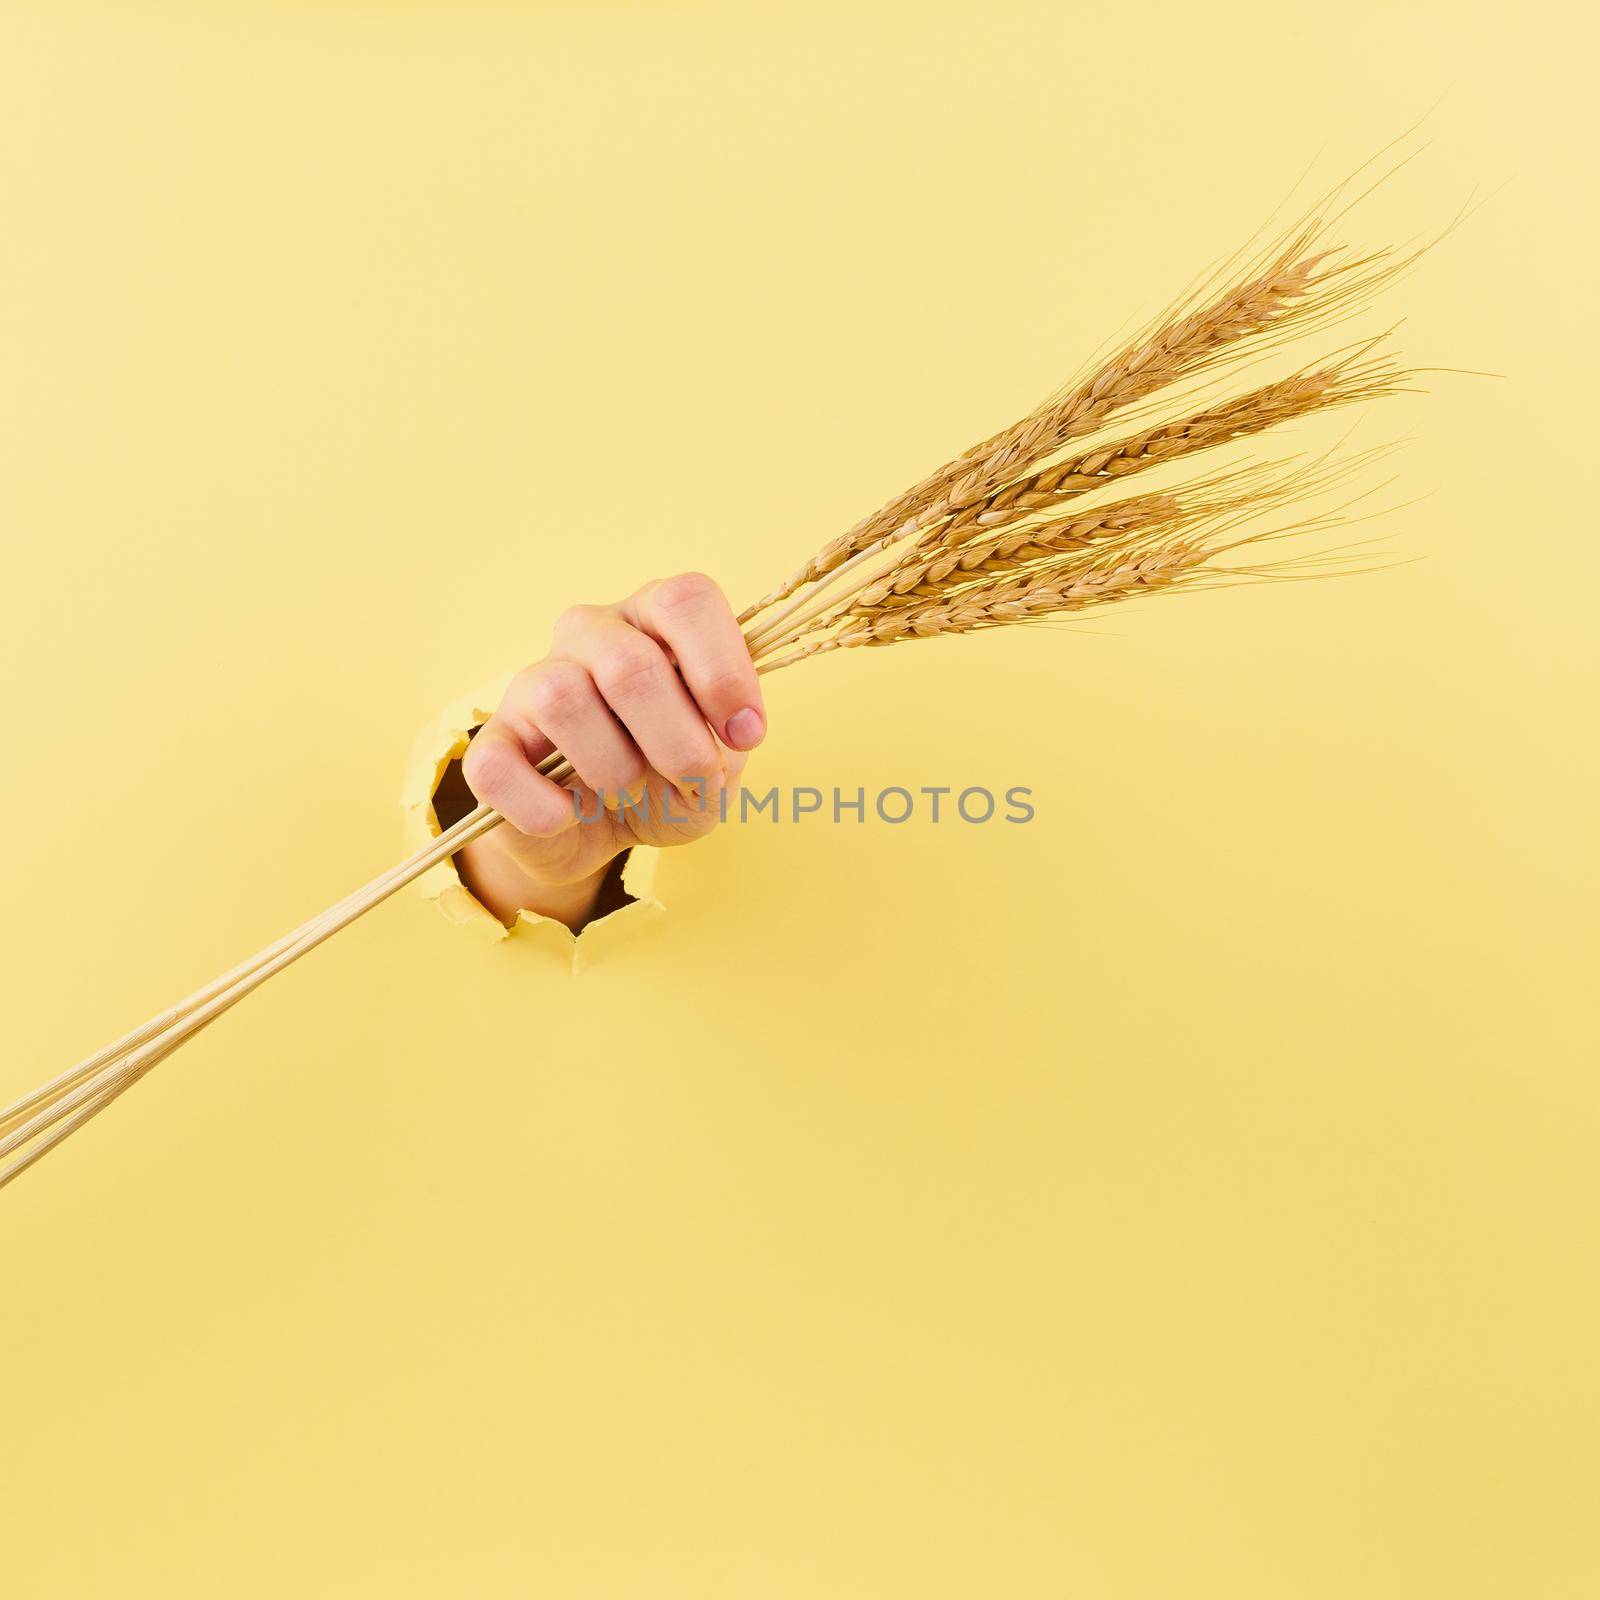 young hand with spikelet in the bursted hole, the concept of strength, agriculture theme